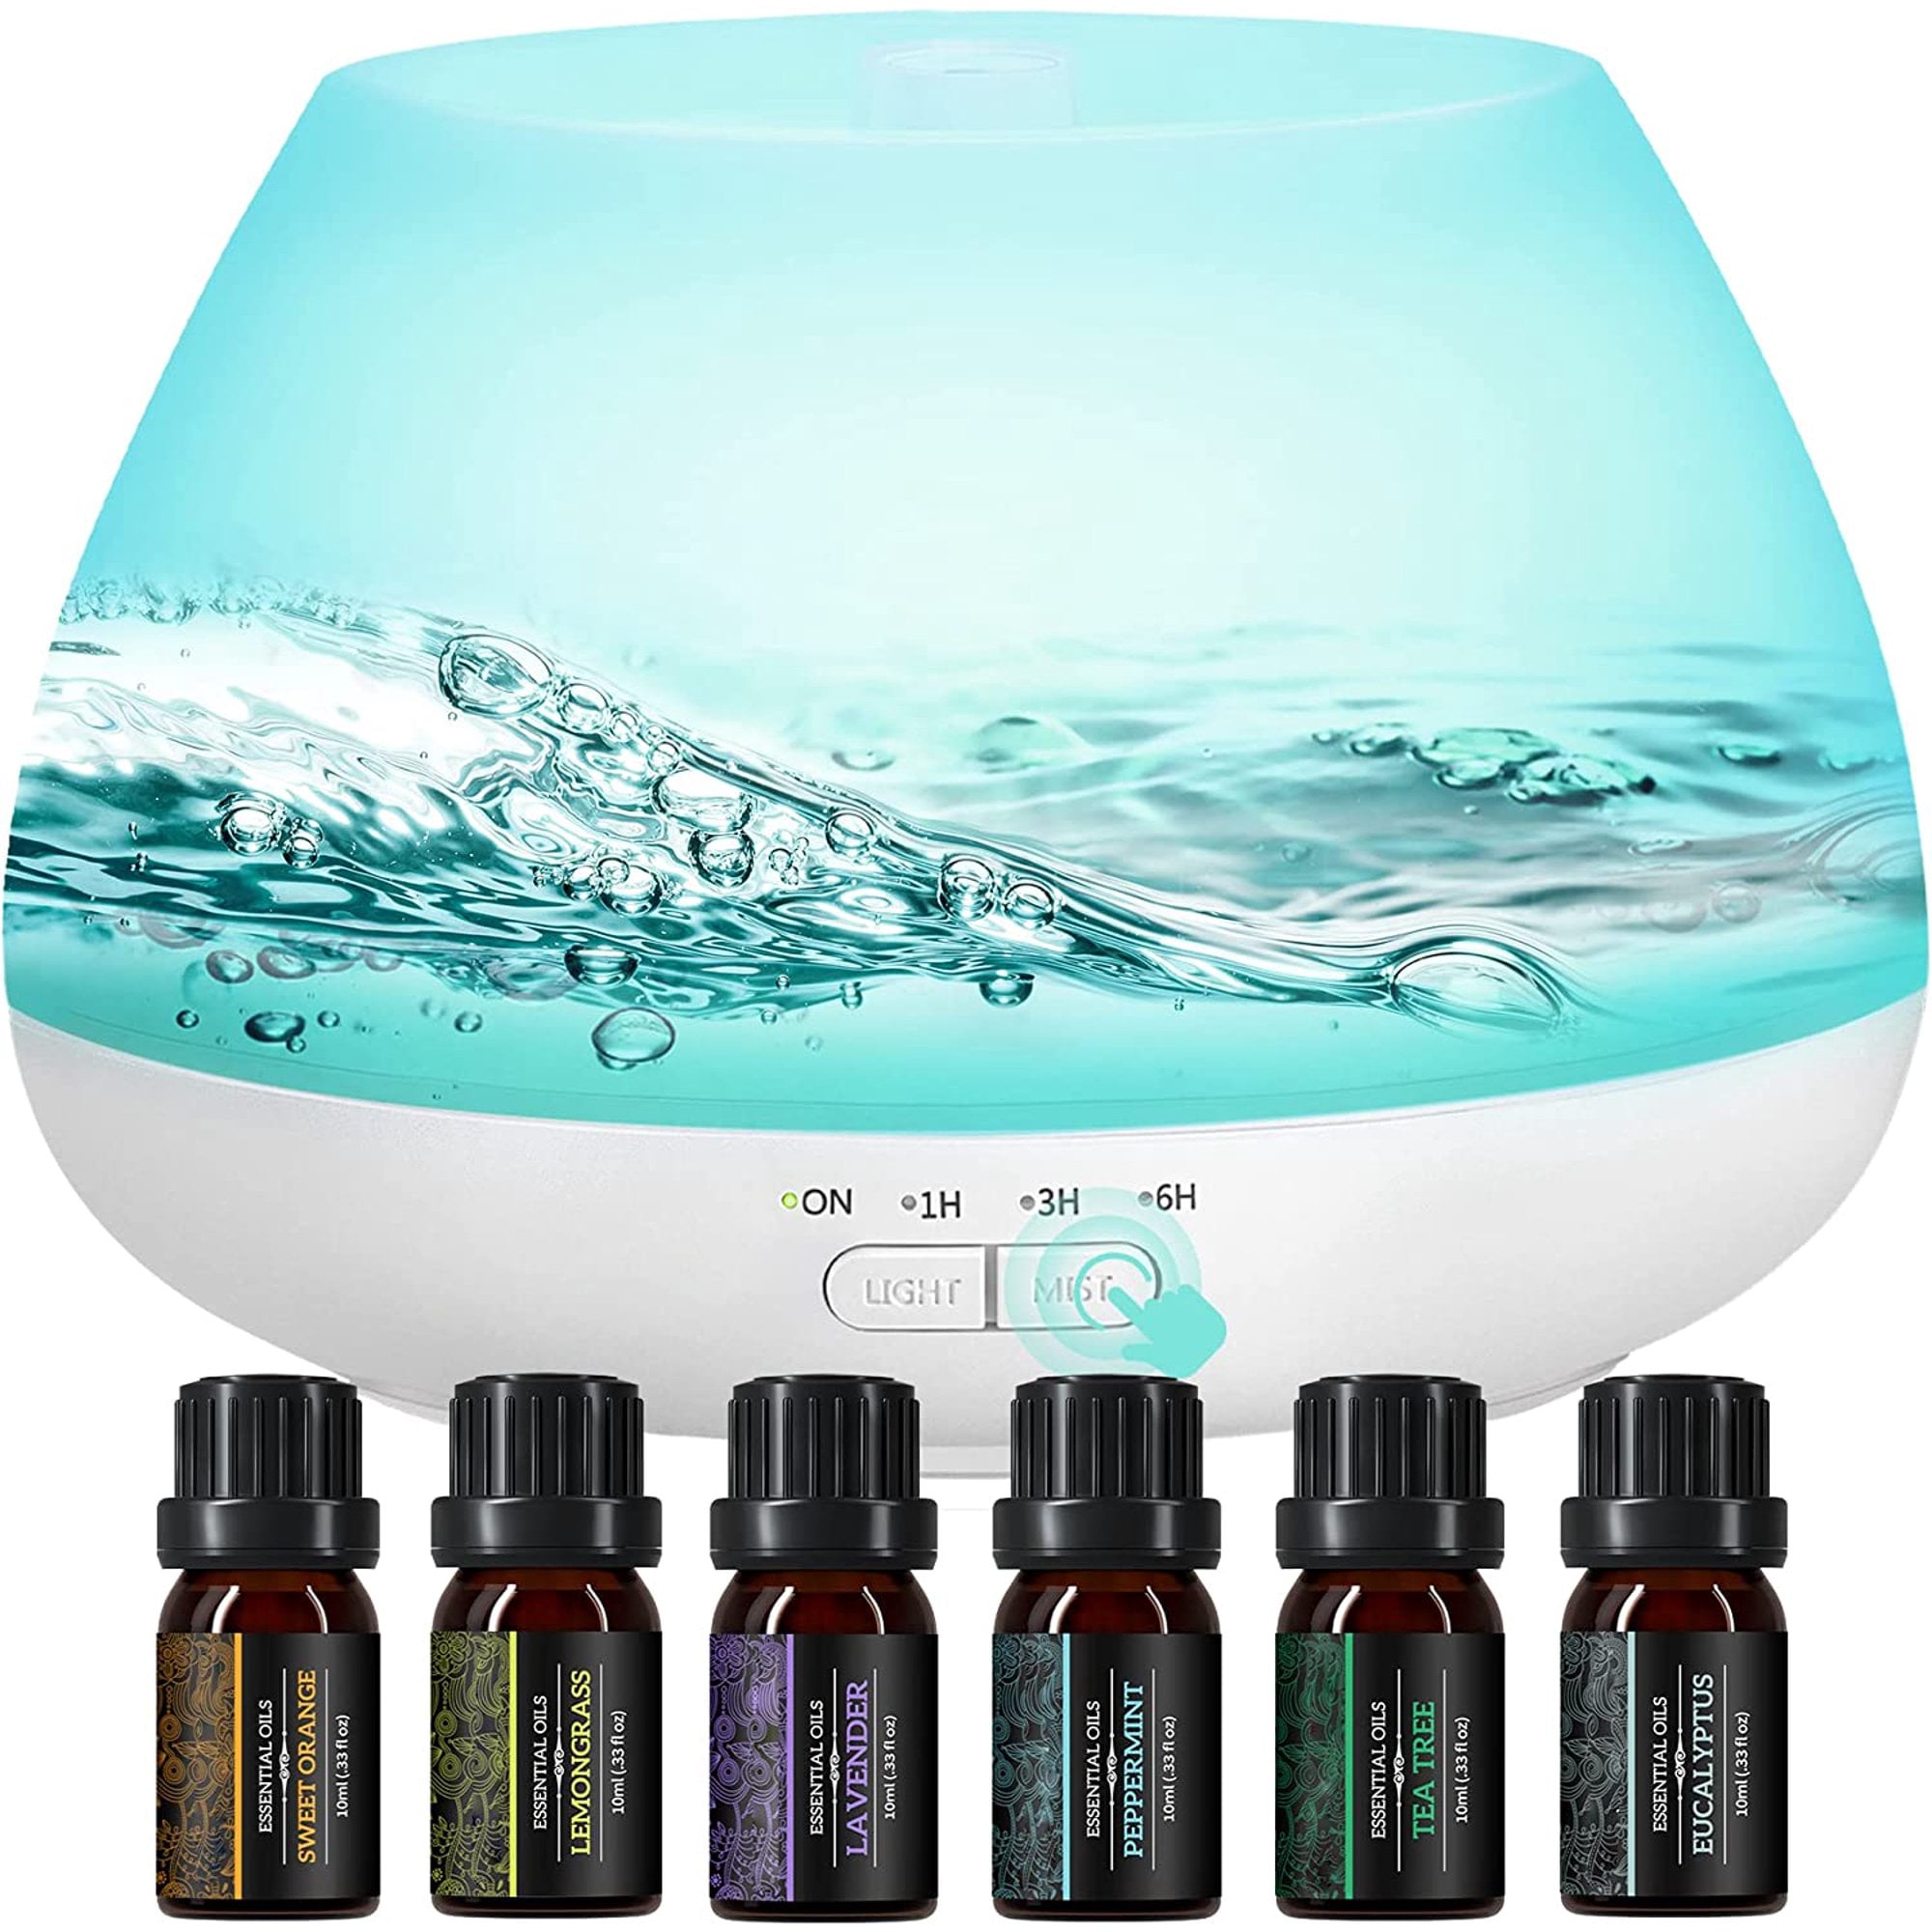 Oil Diffuser Essential Oils Included 6 Pack, 500ml Essential Oil Diffuser Large Room, 8 Colors+23dB Quiet Essential Oil Diffusers for Essential Oils